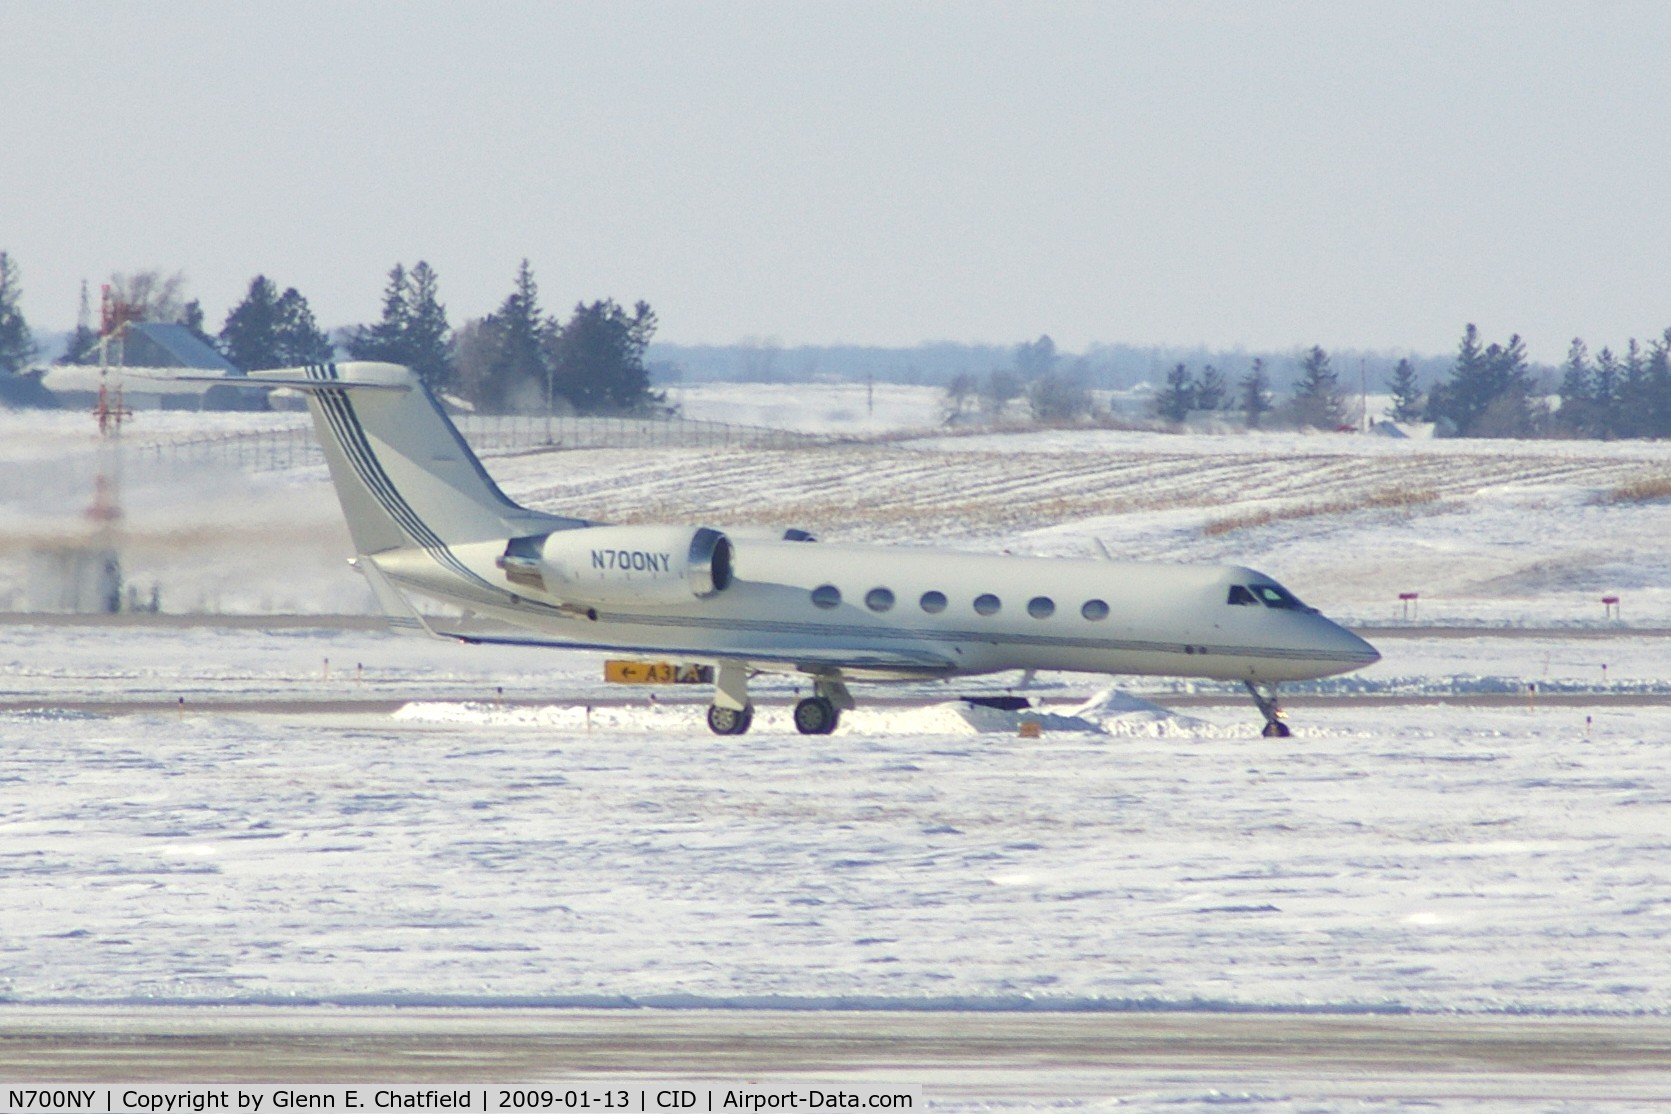 N700NY, 2001 Gulfstream Aerospace G-IV C/N 1468, About 3/4 mile from my window, taxiing to PS Air